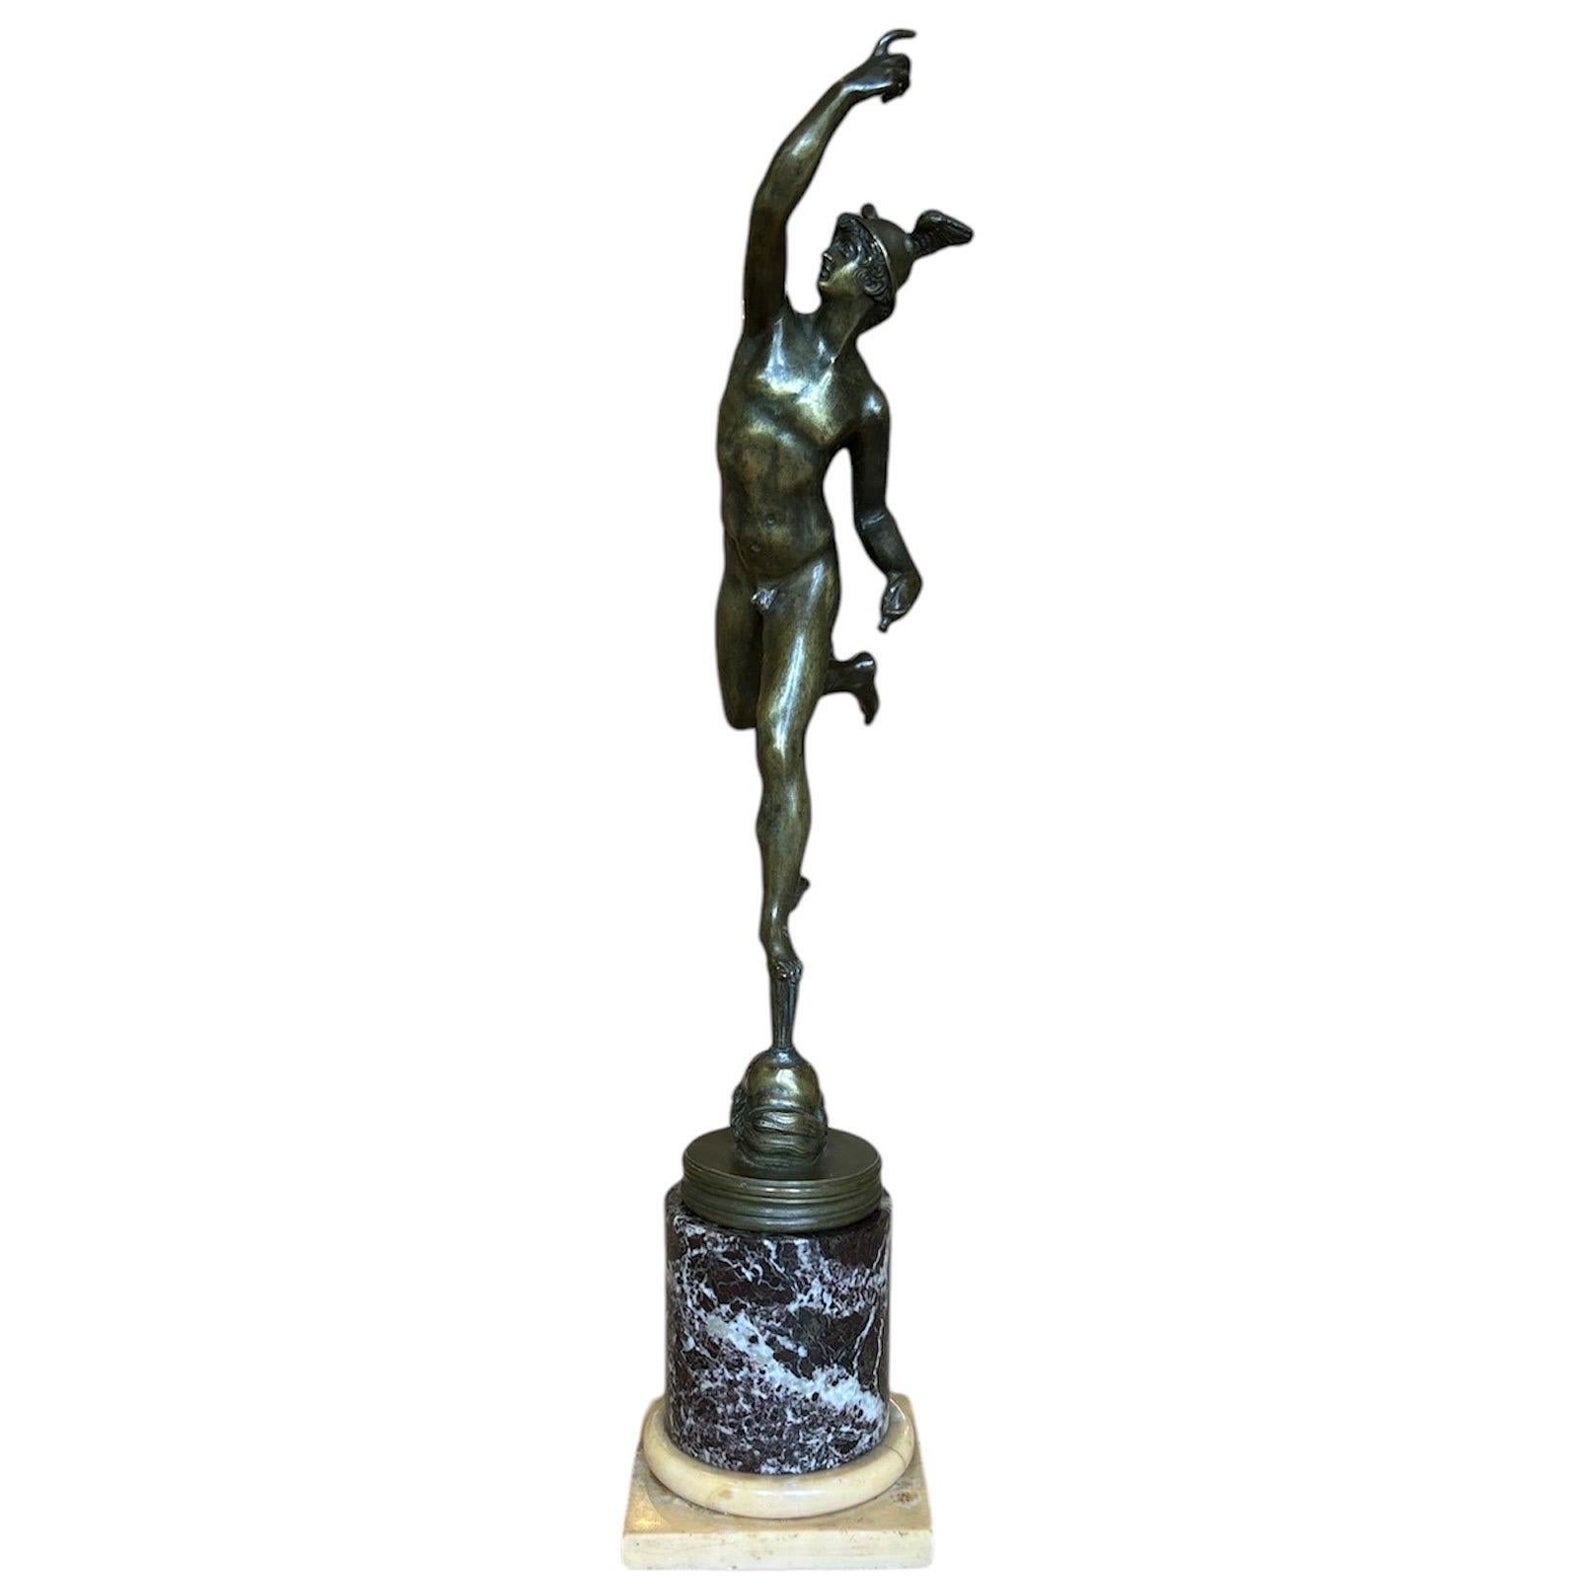 A grand tour bronze figure of Mercury ( Hermes ) on a marble collum For Sale